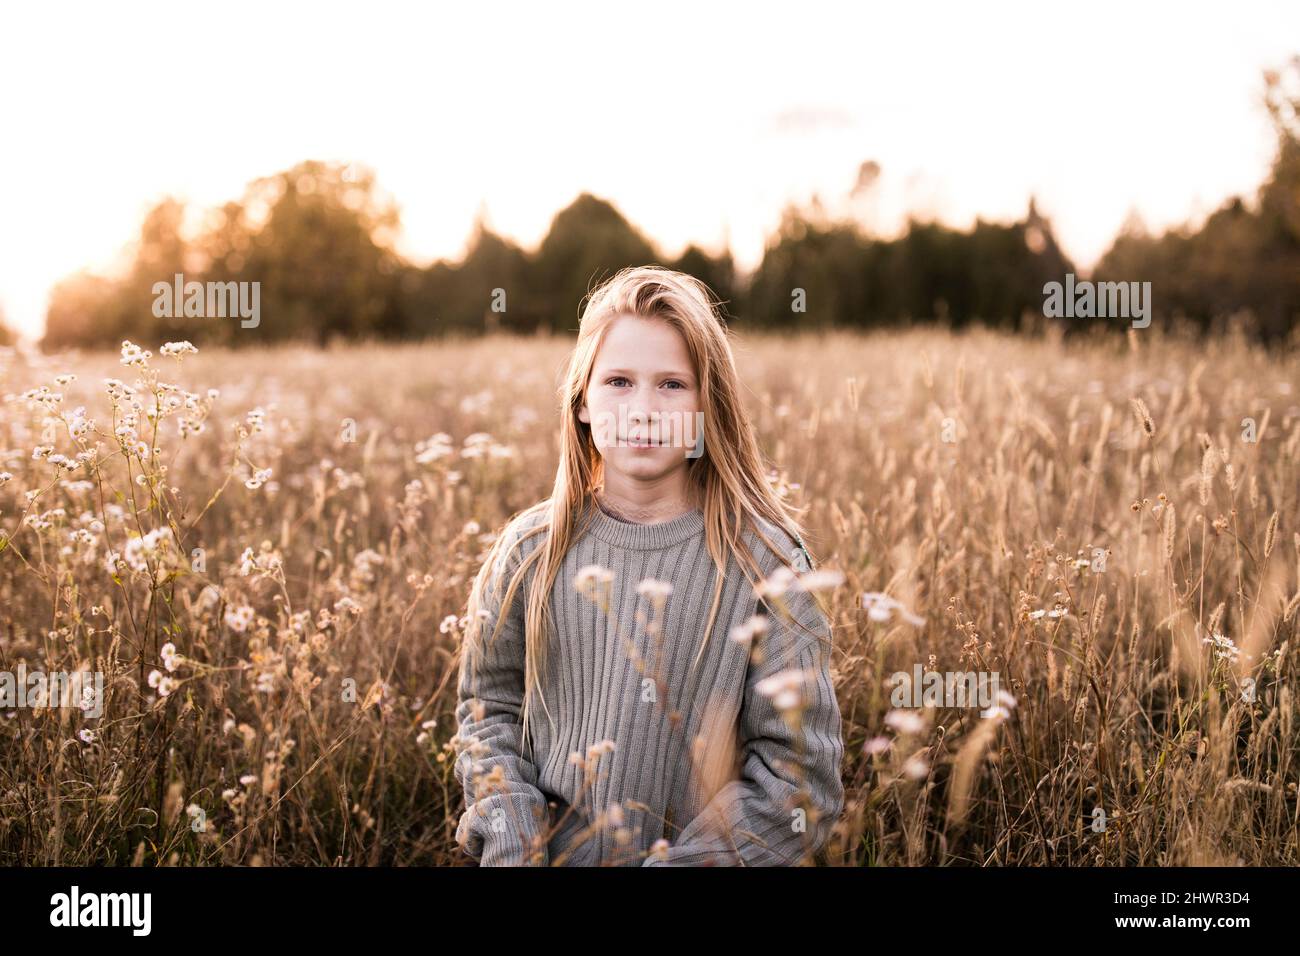 Blond girl with long blond hair standing at wildflower field Stock Photo